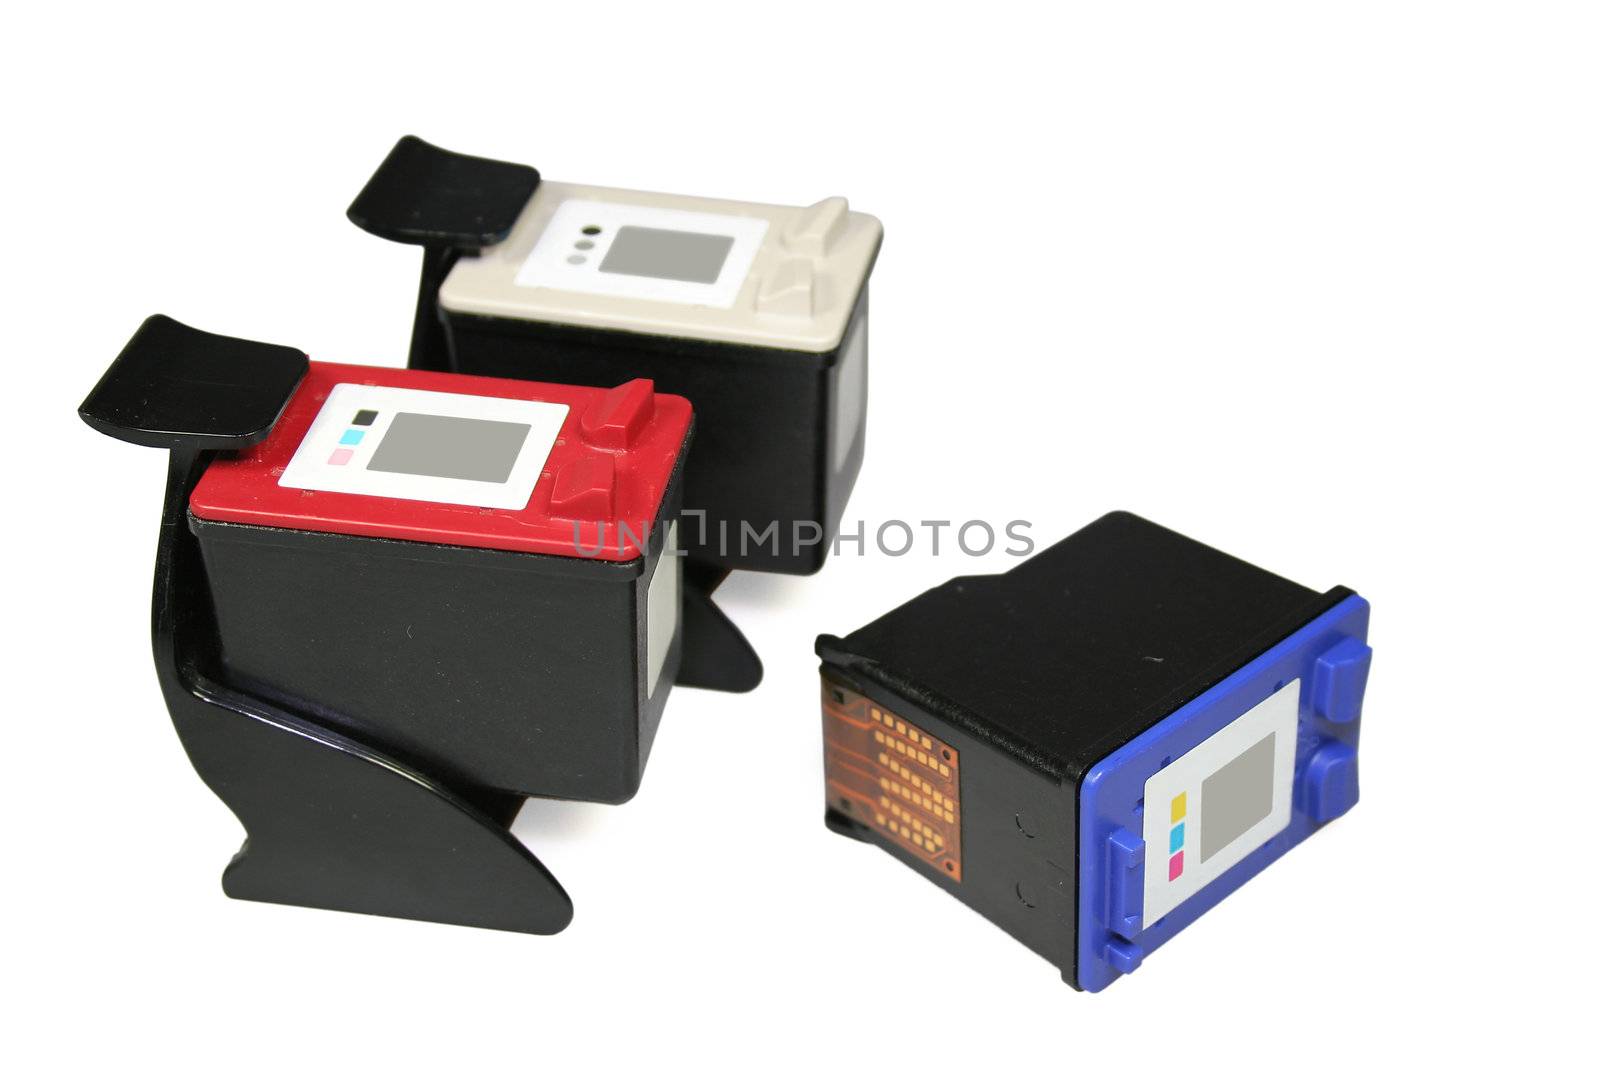 Three different cartridges of an ink printer. Isolated on white.